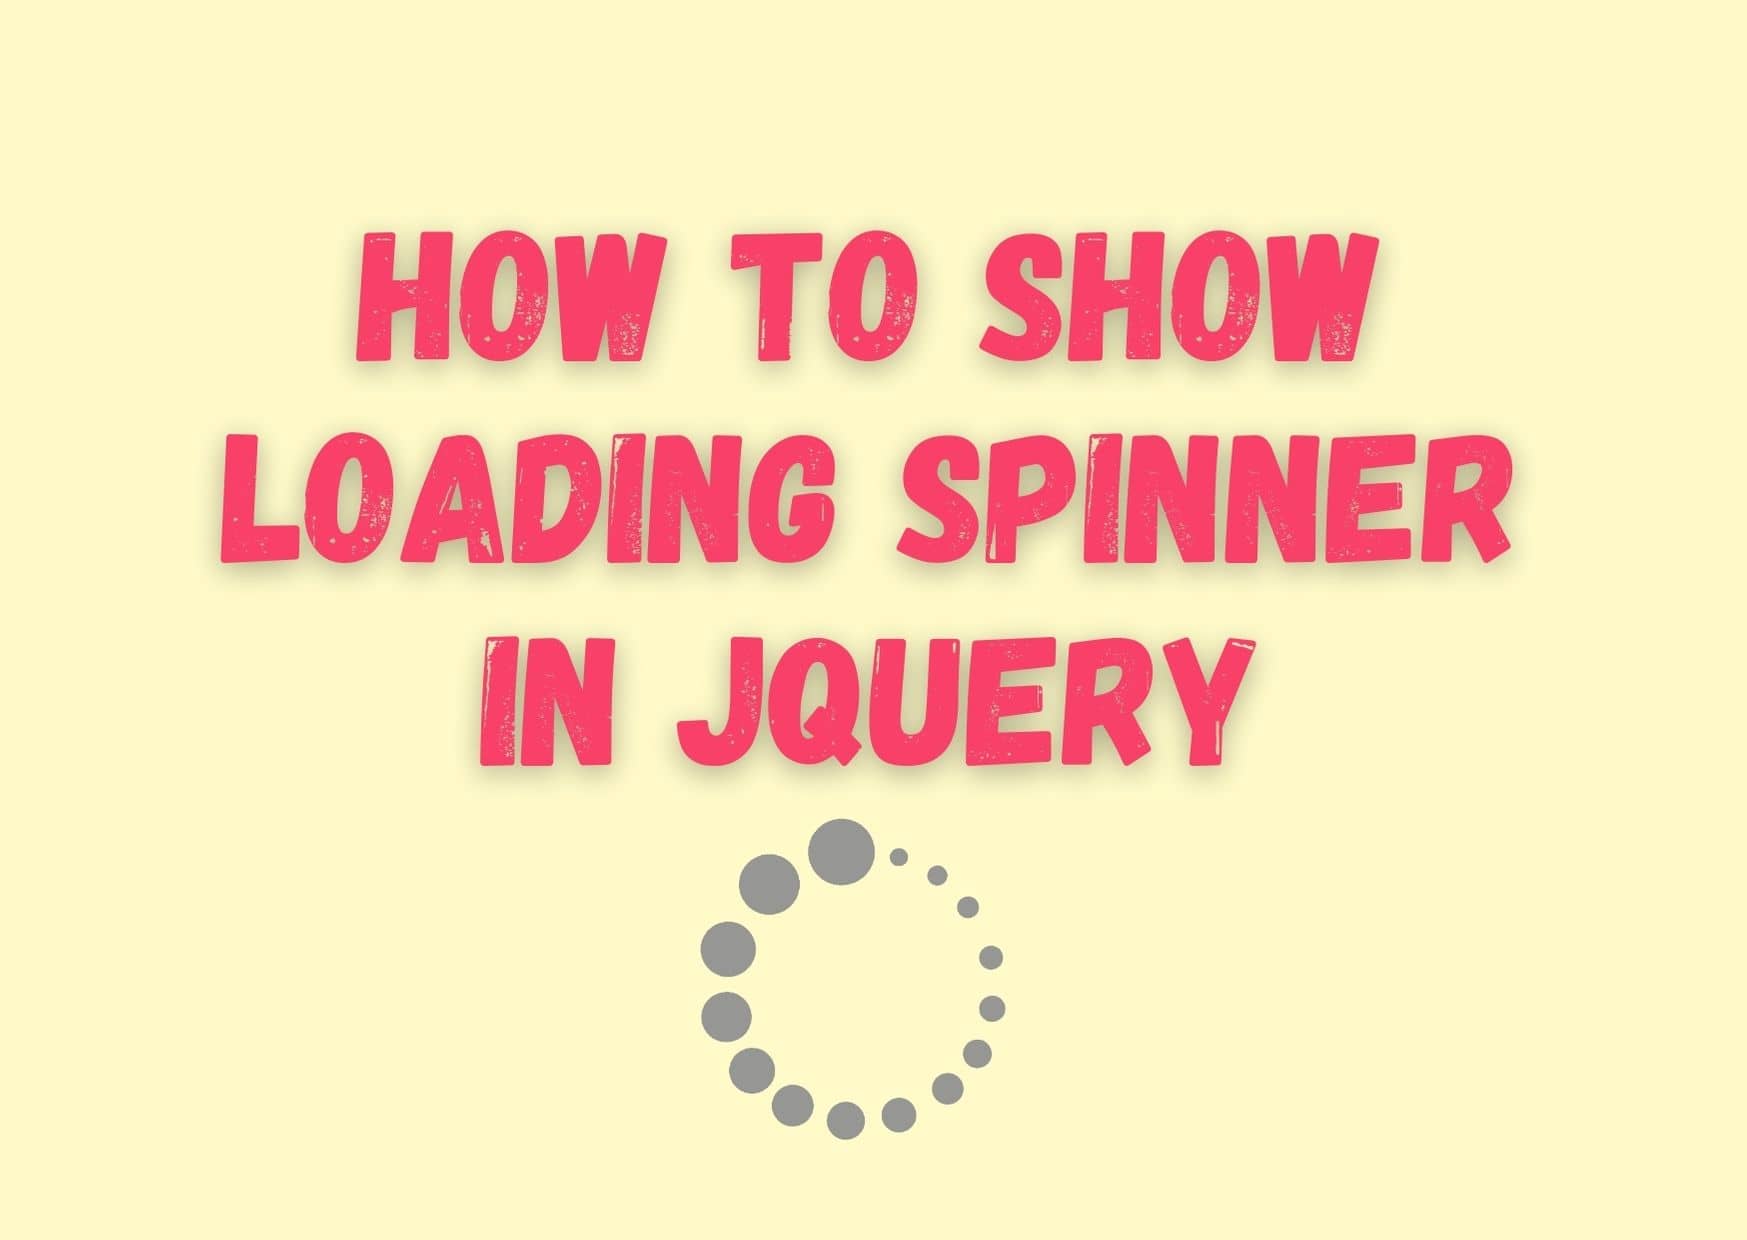 How to Show Loading Spinner in jQuery | Use the ajaxStart()